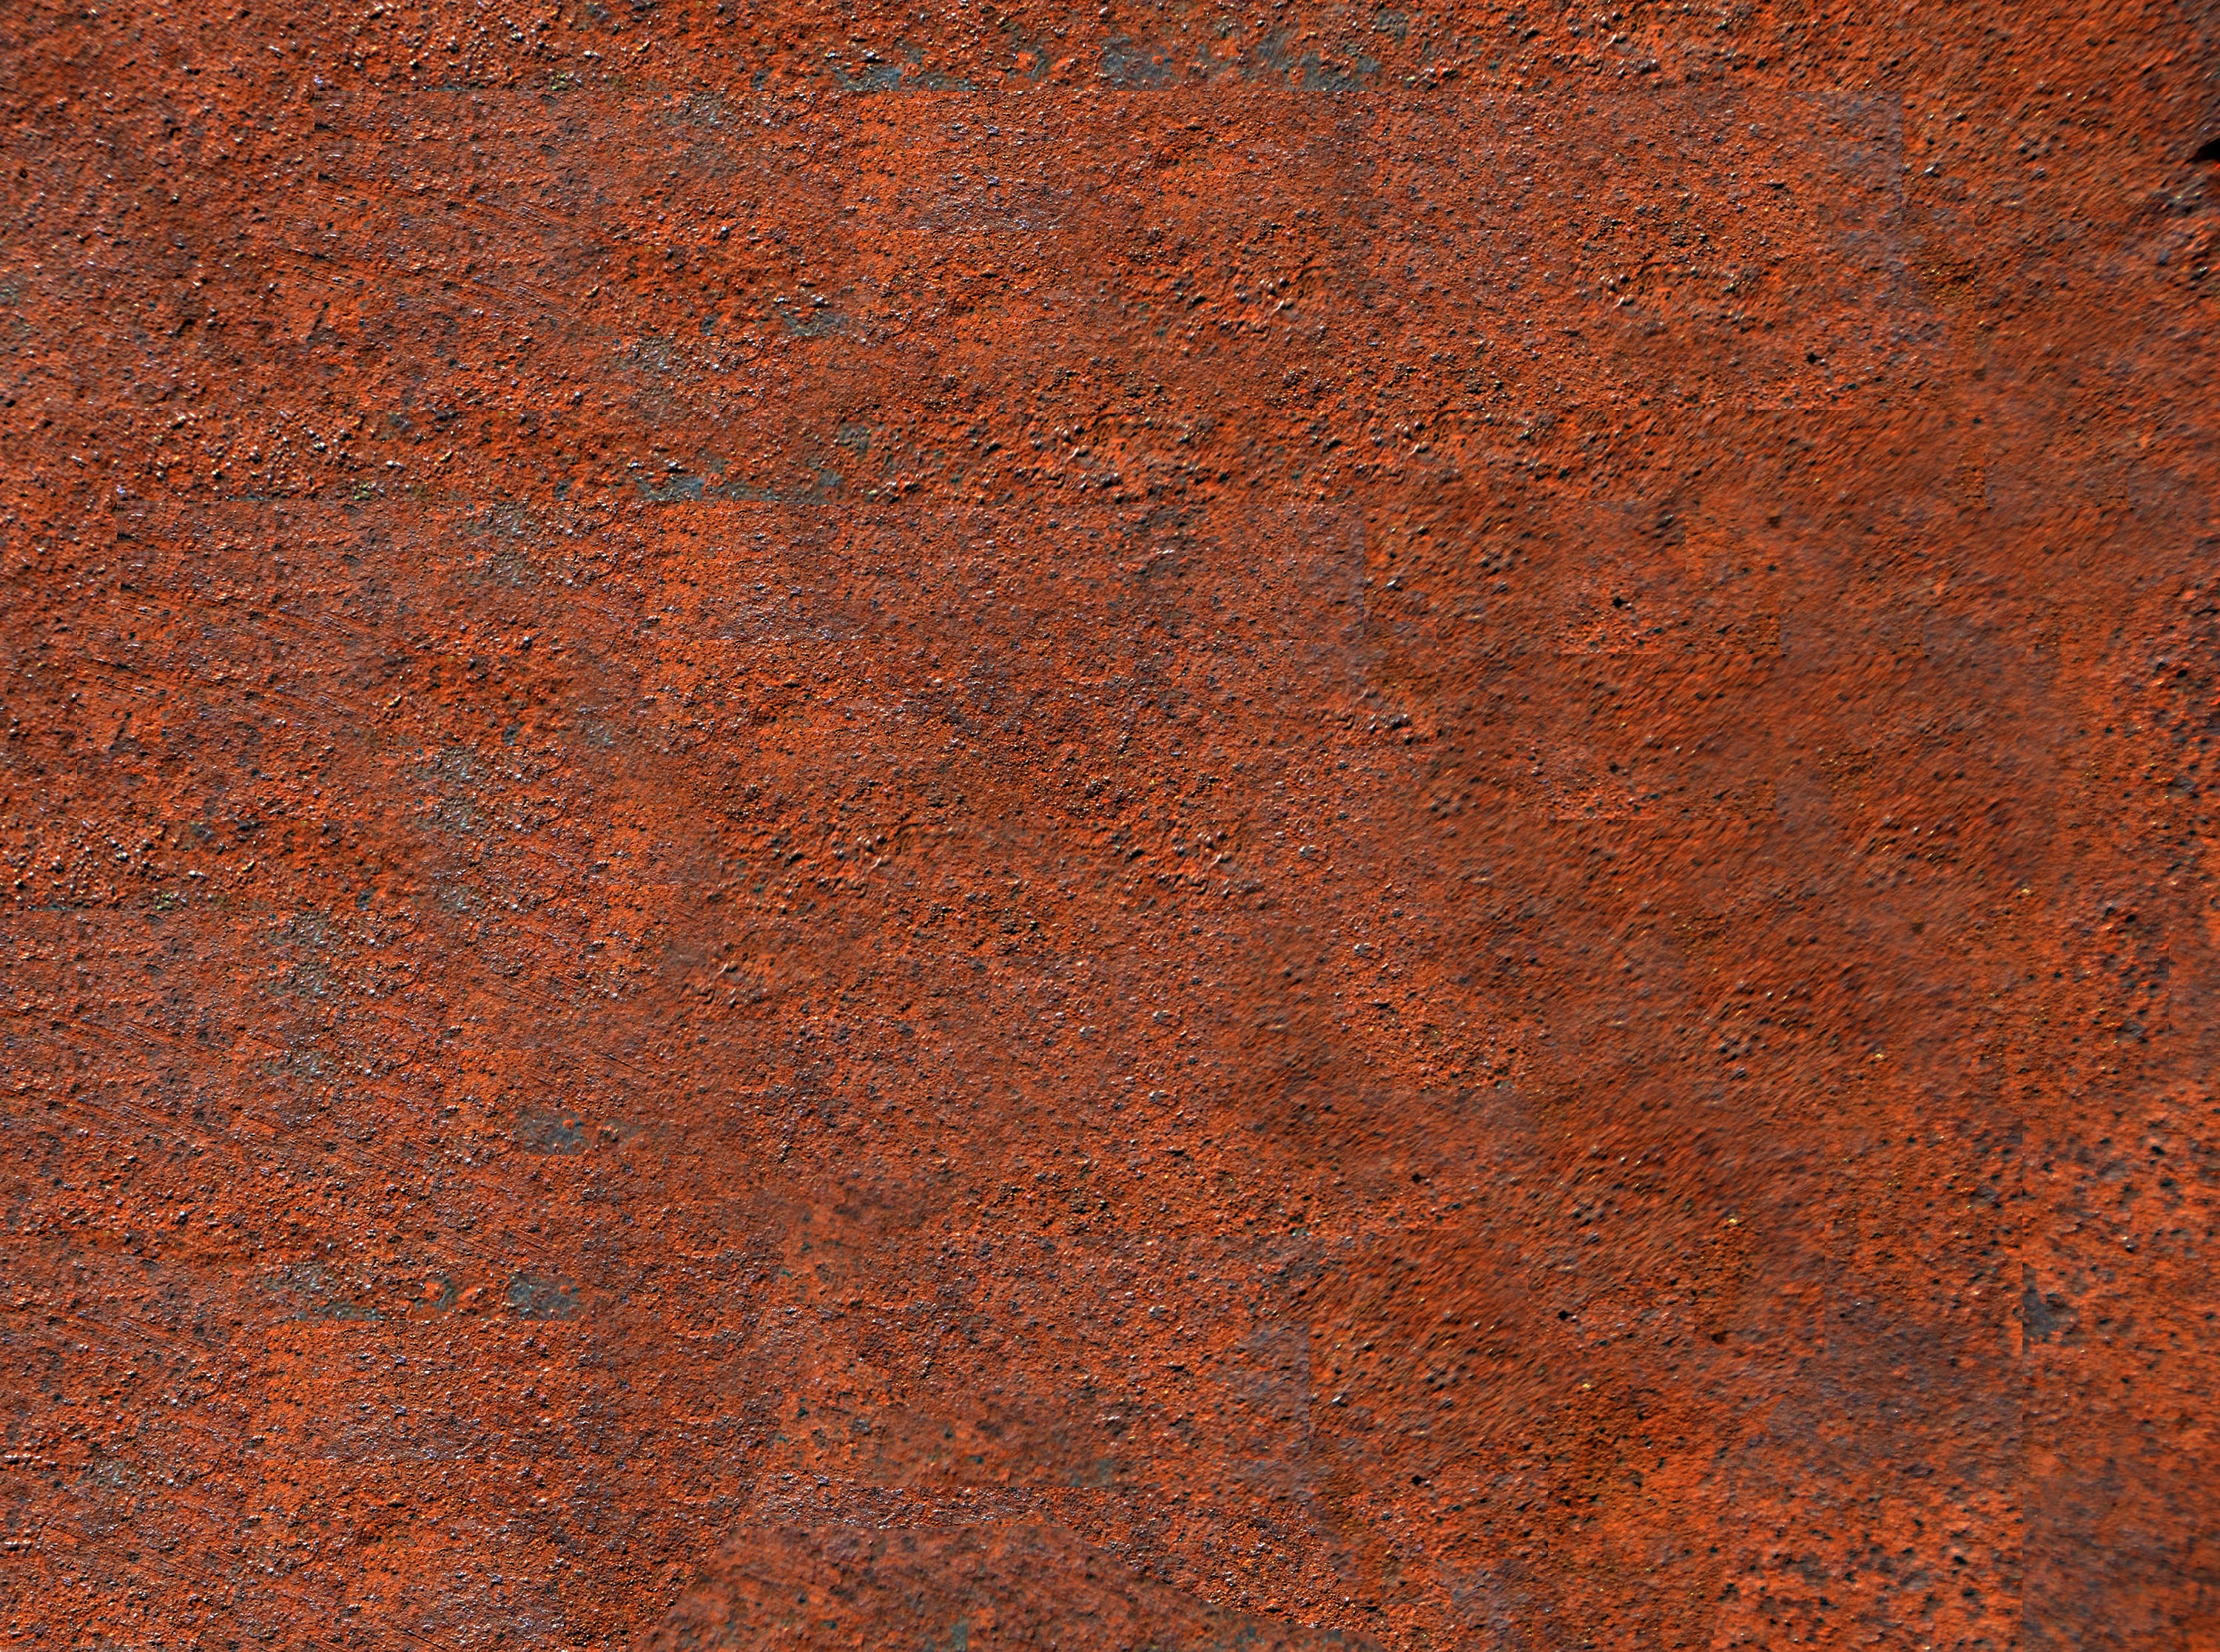 orange metal surface, just rust, stainless, rusted, iron, texture